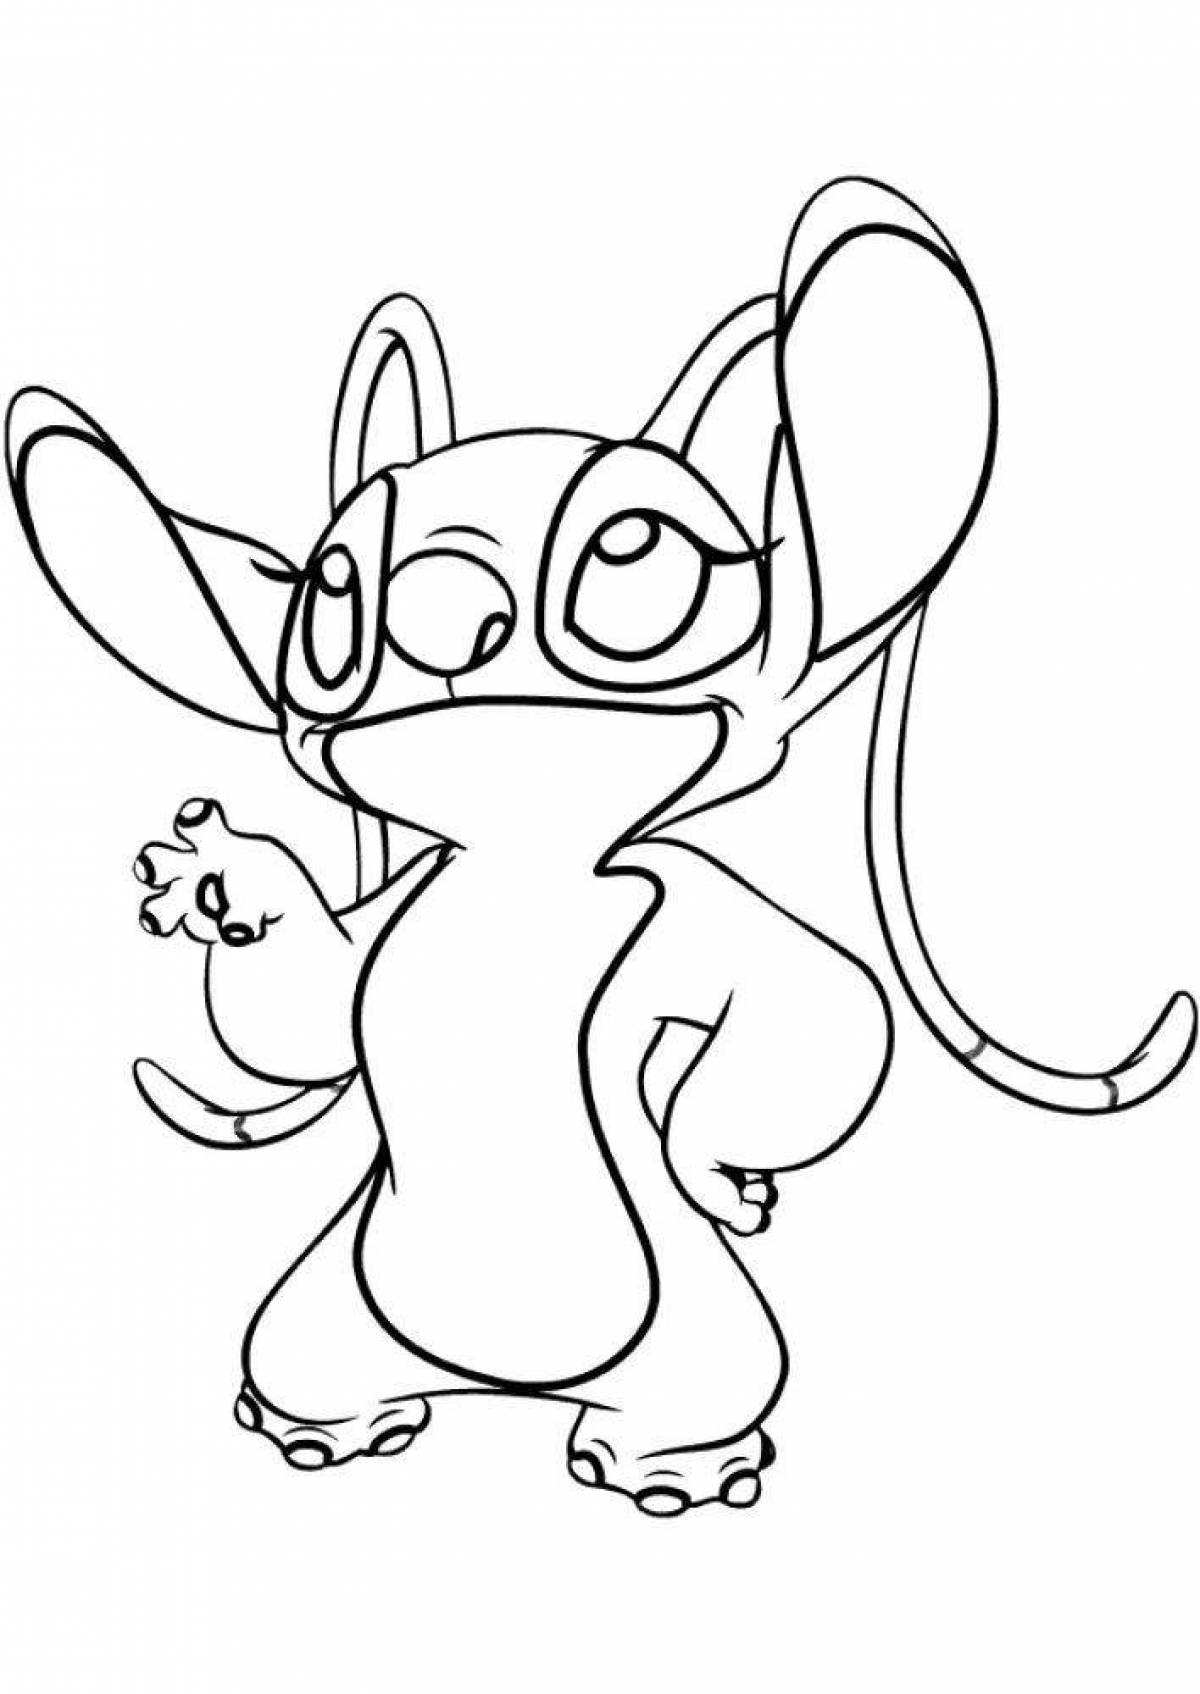 Animated stitch and angel coloring page